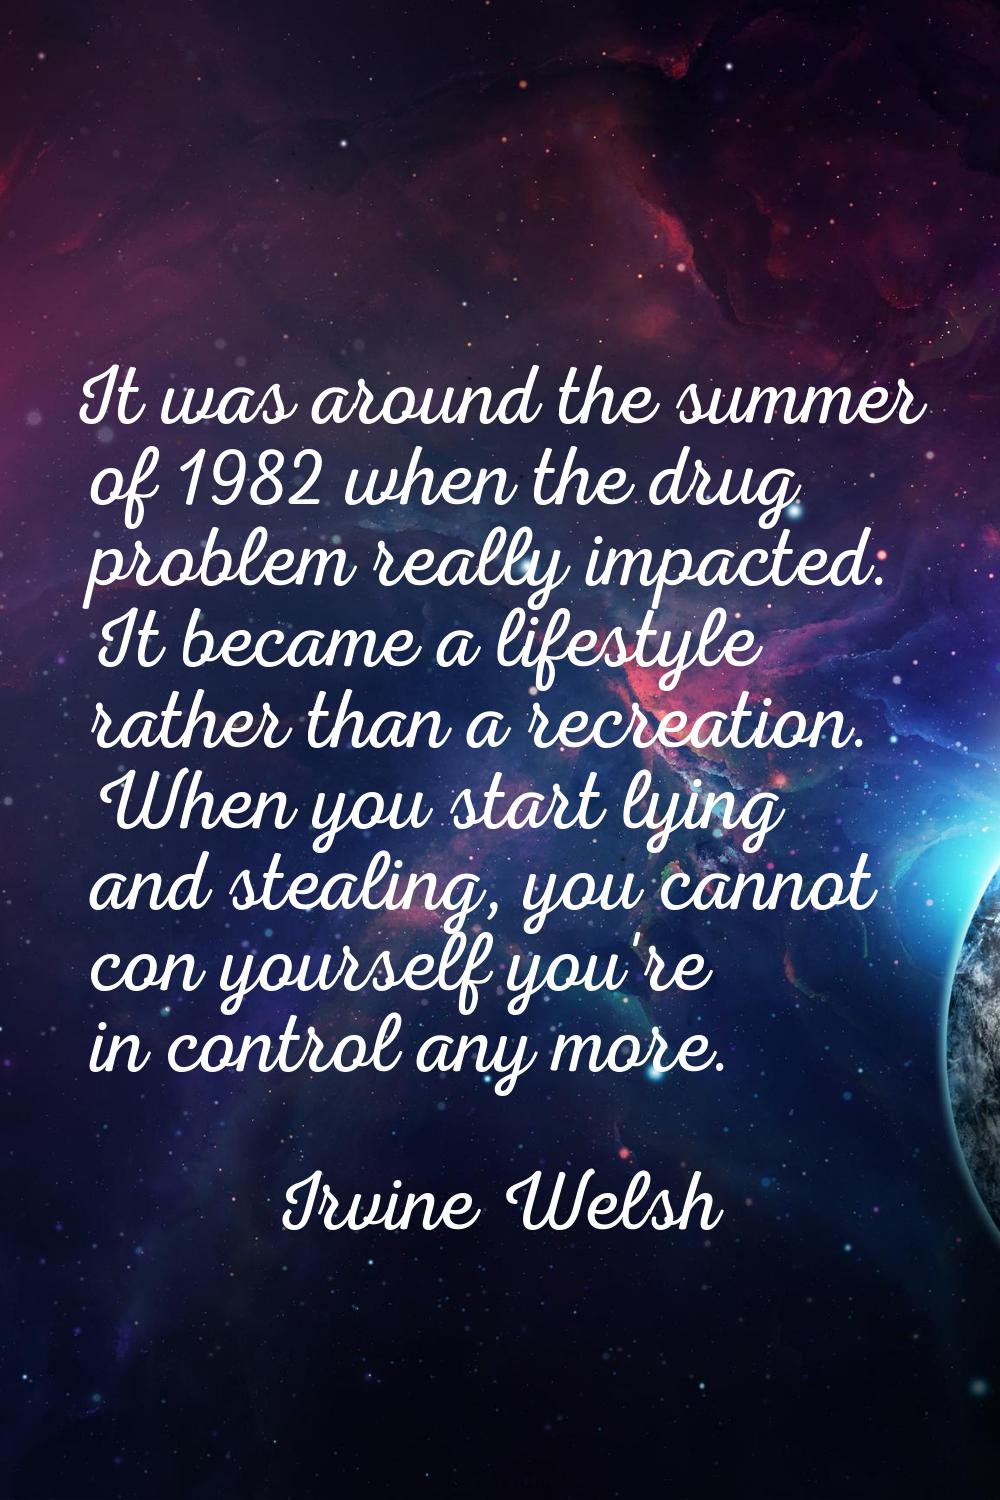 It was around the summer of 1982 when the drug problem really impacted. It became a lifestyle rathe